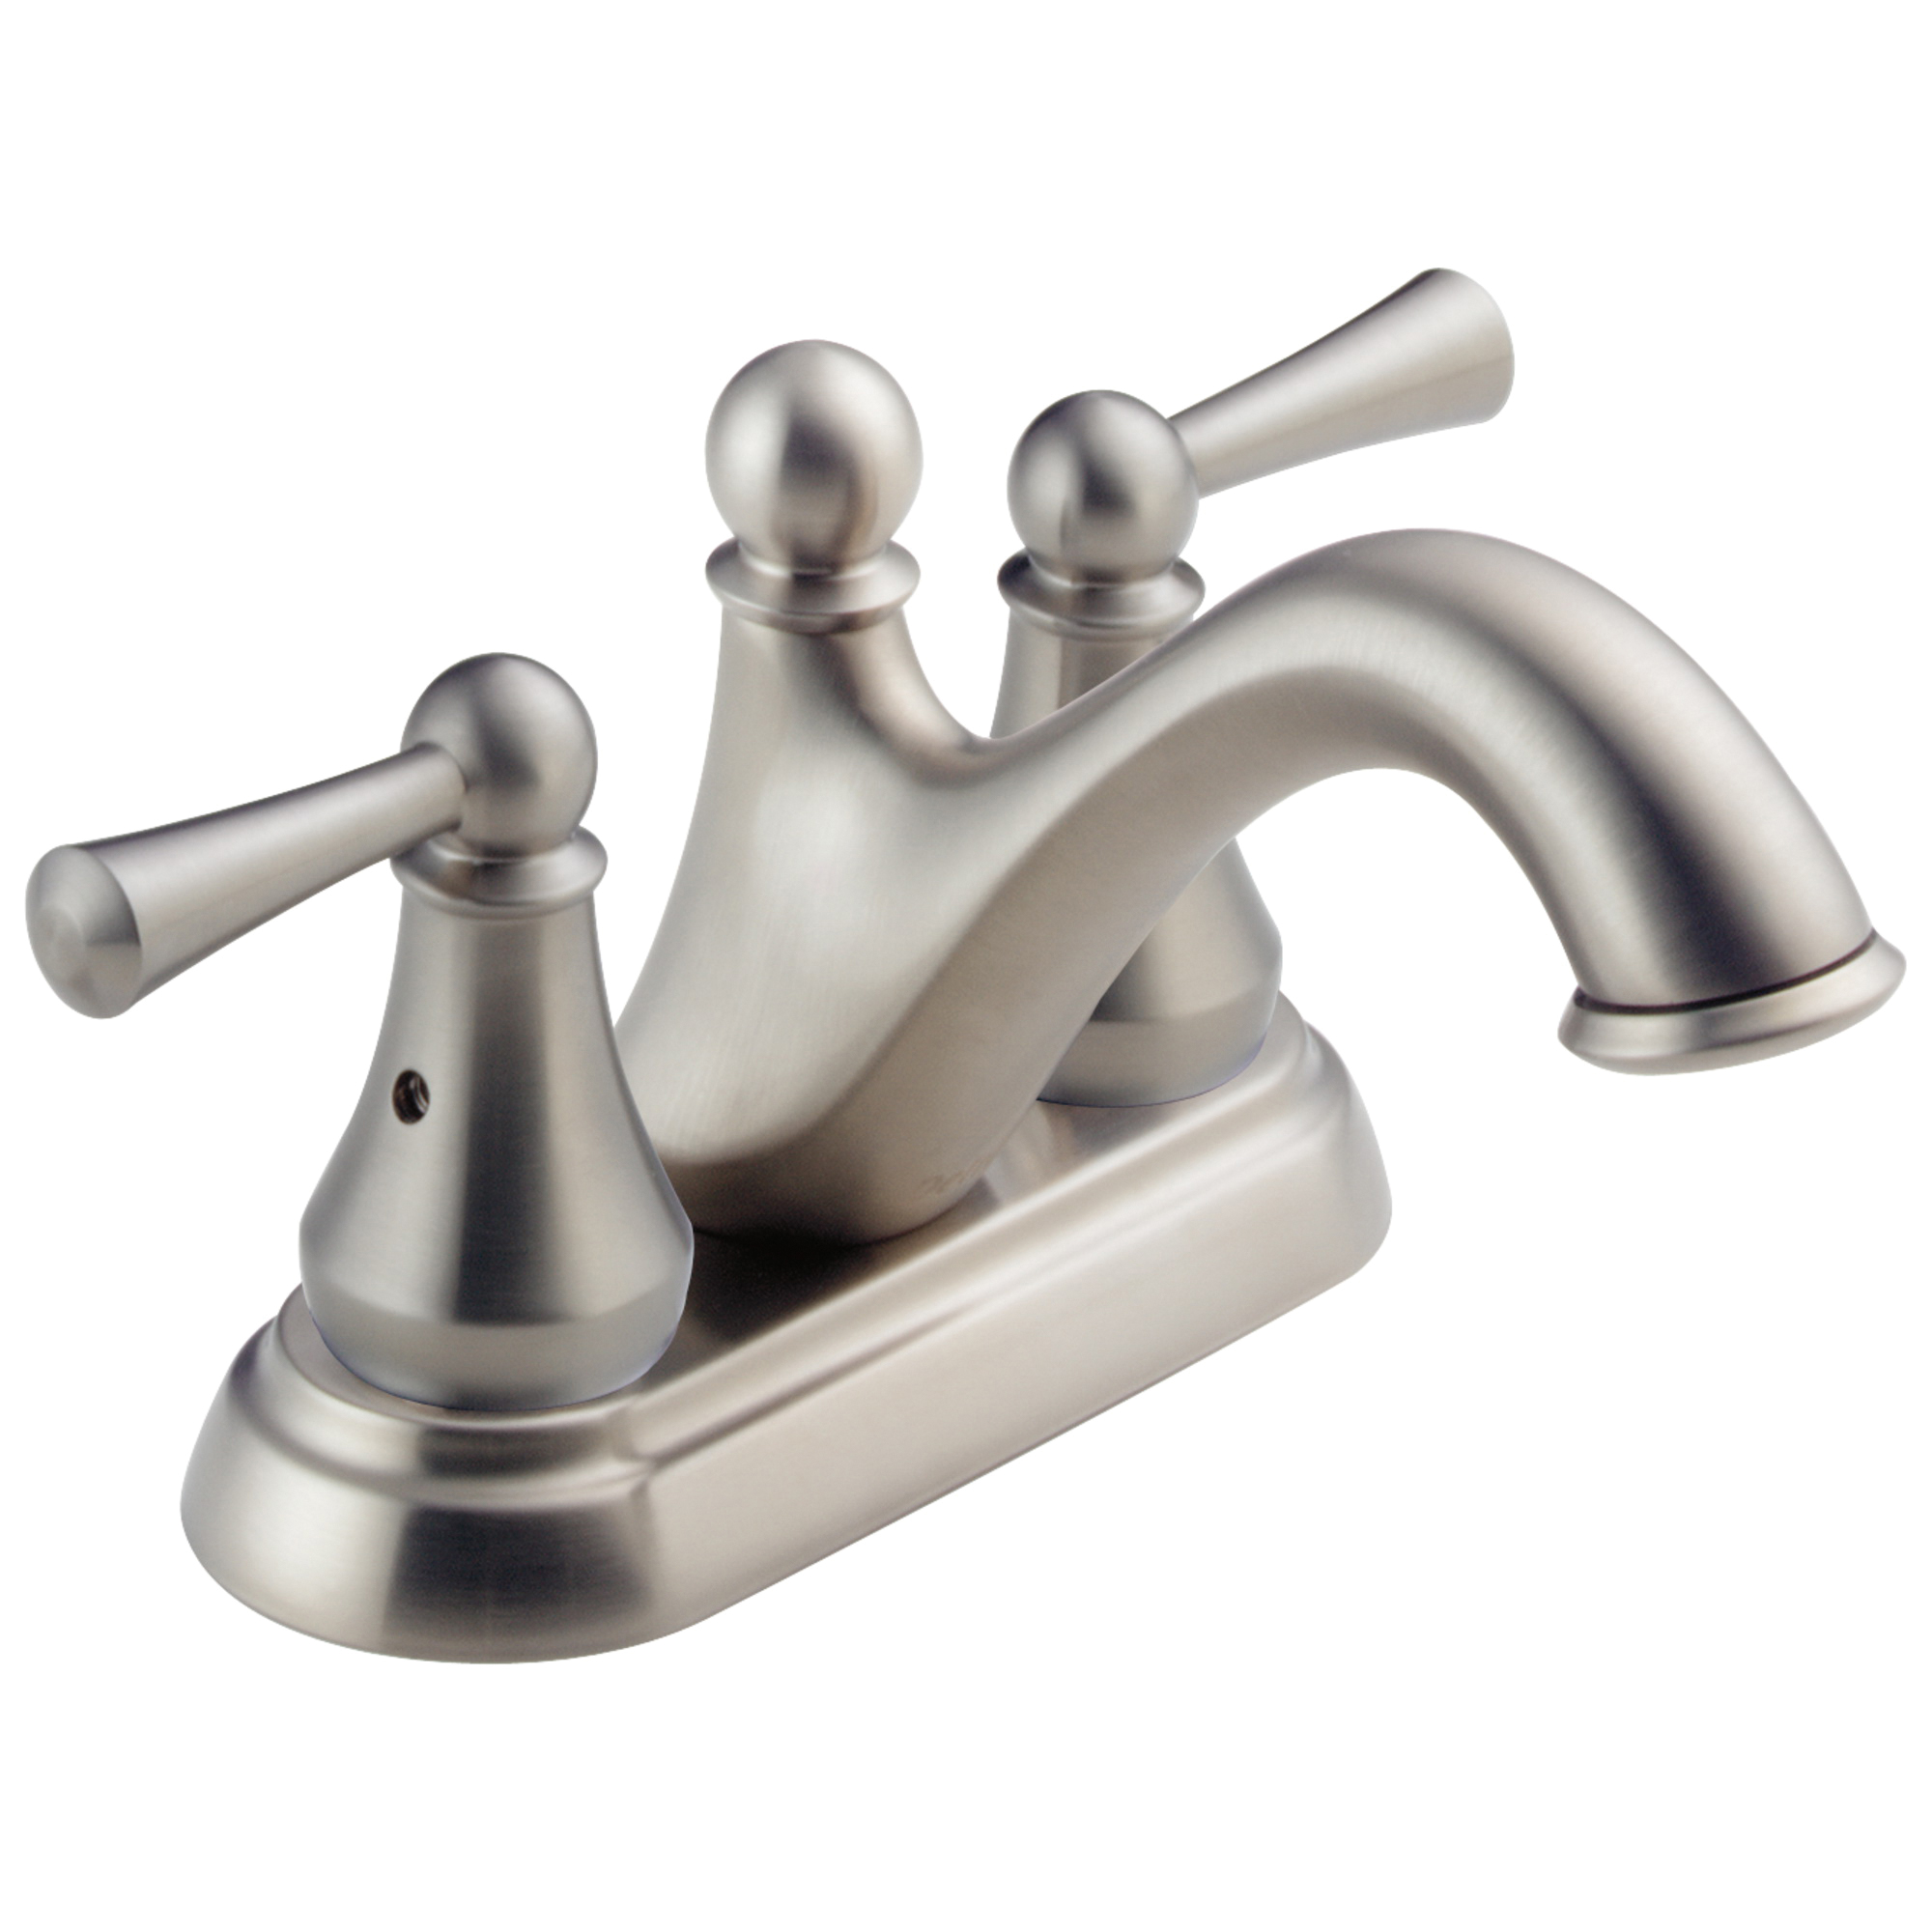 DELTA® 25999LF-SS Centerset Lavatory Faucet, Haywood™, Stainless Steel, 2 Handles, Plastic Pop-Up Drain, 1.2 gpm